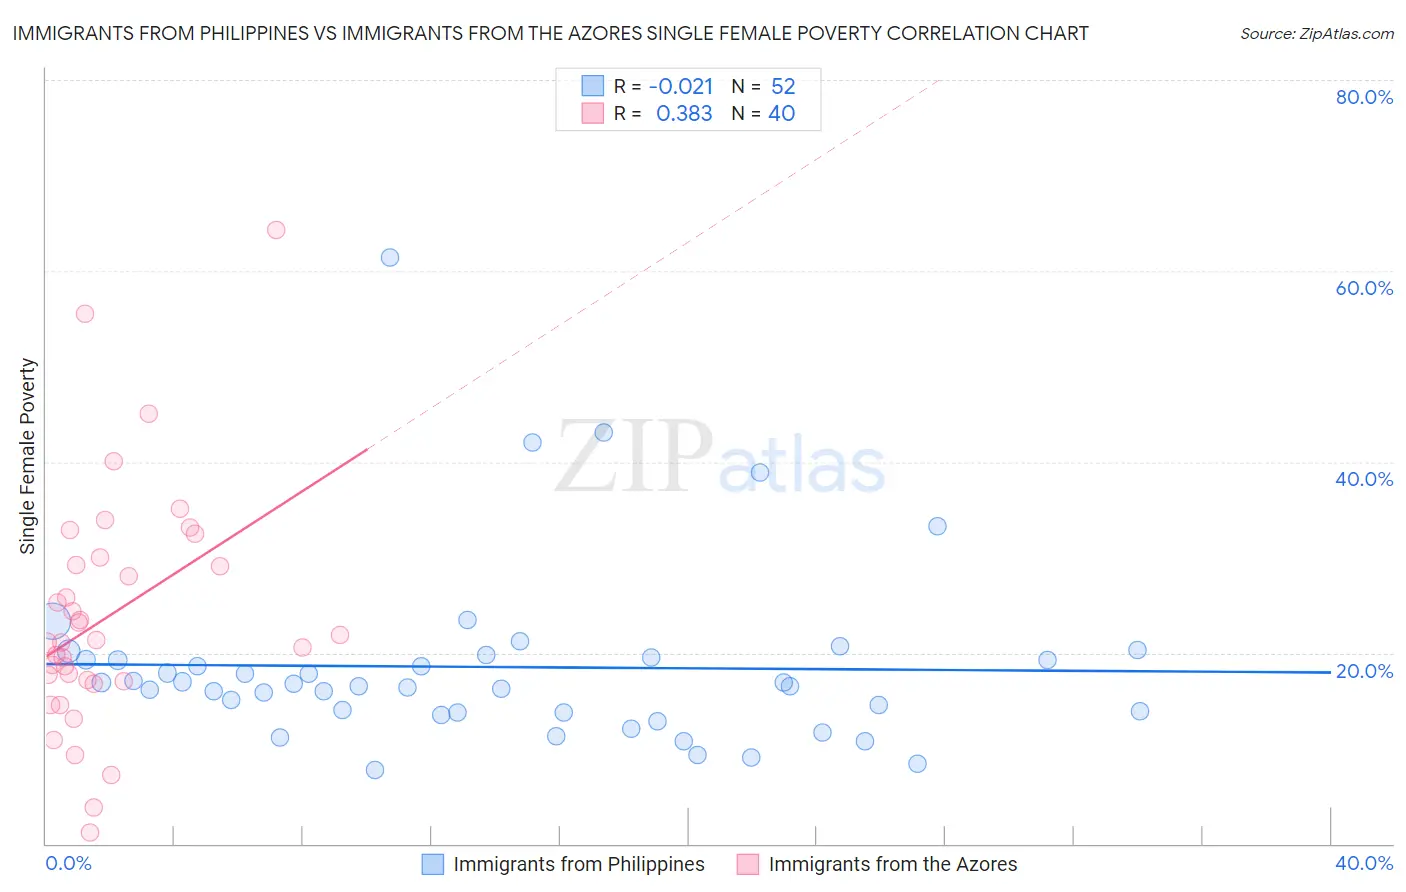 Immigrants from Philippines vs Immigrants from the Azores Single Female Poverty